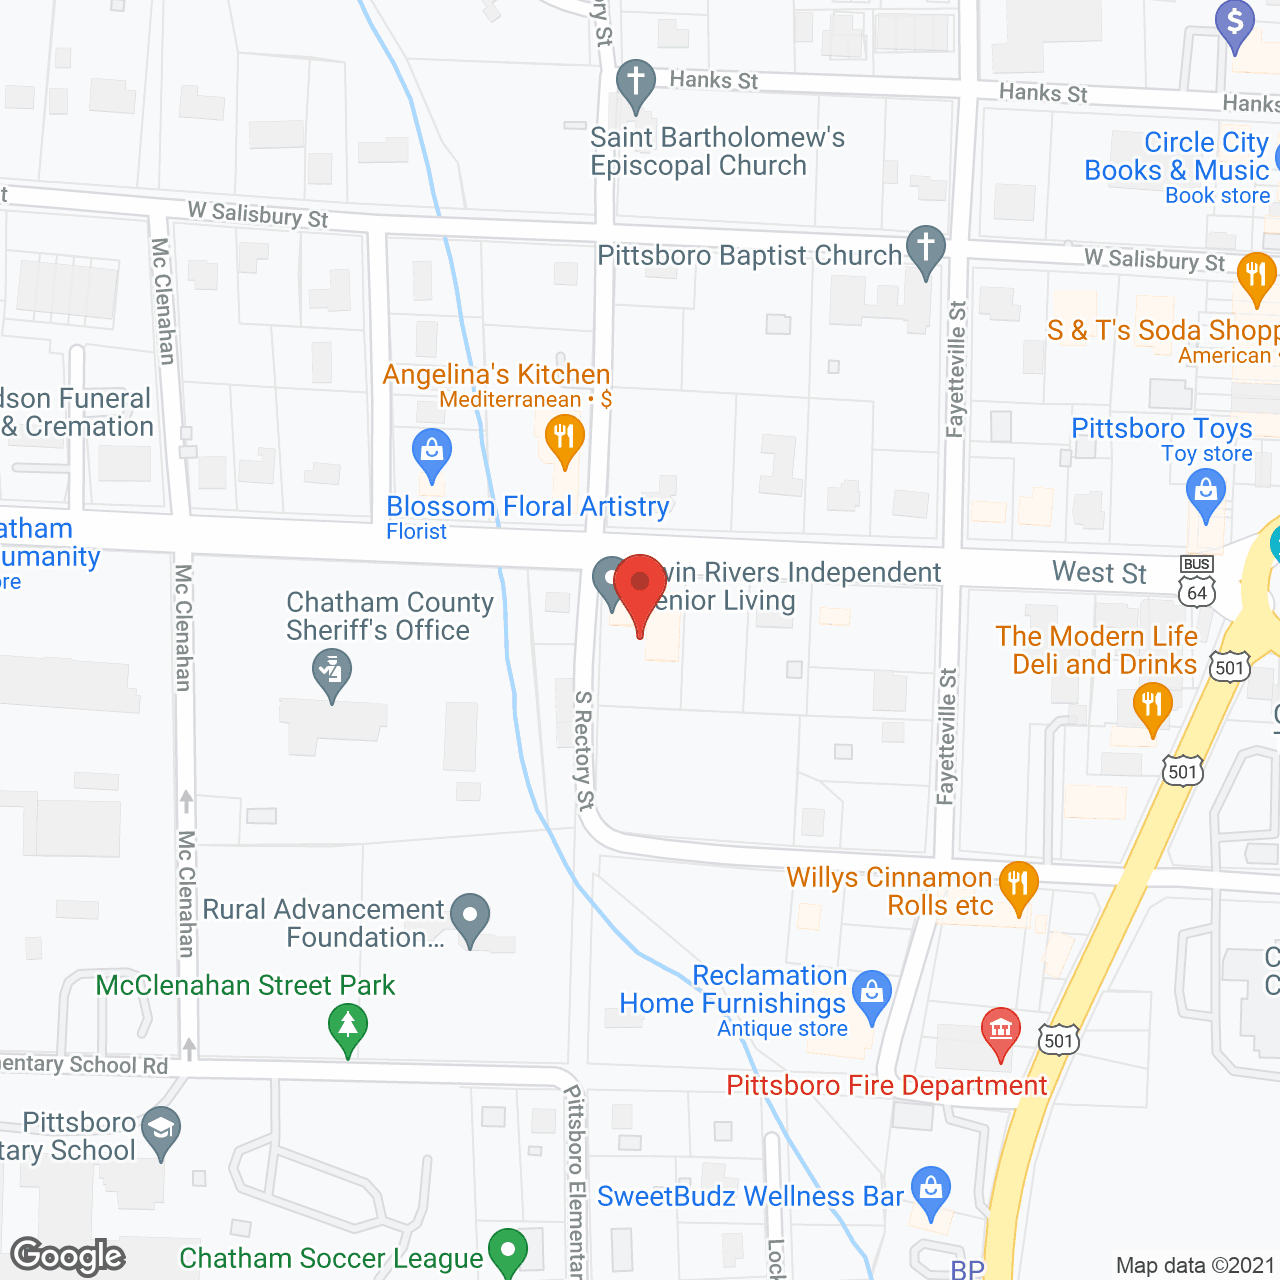 Twin Rivers Senior Independent Living in google map